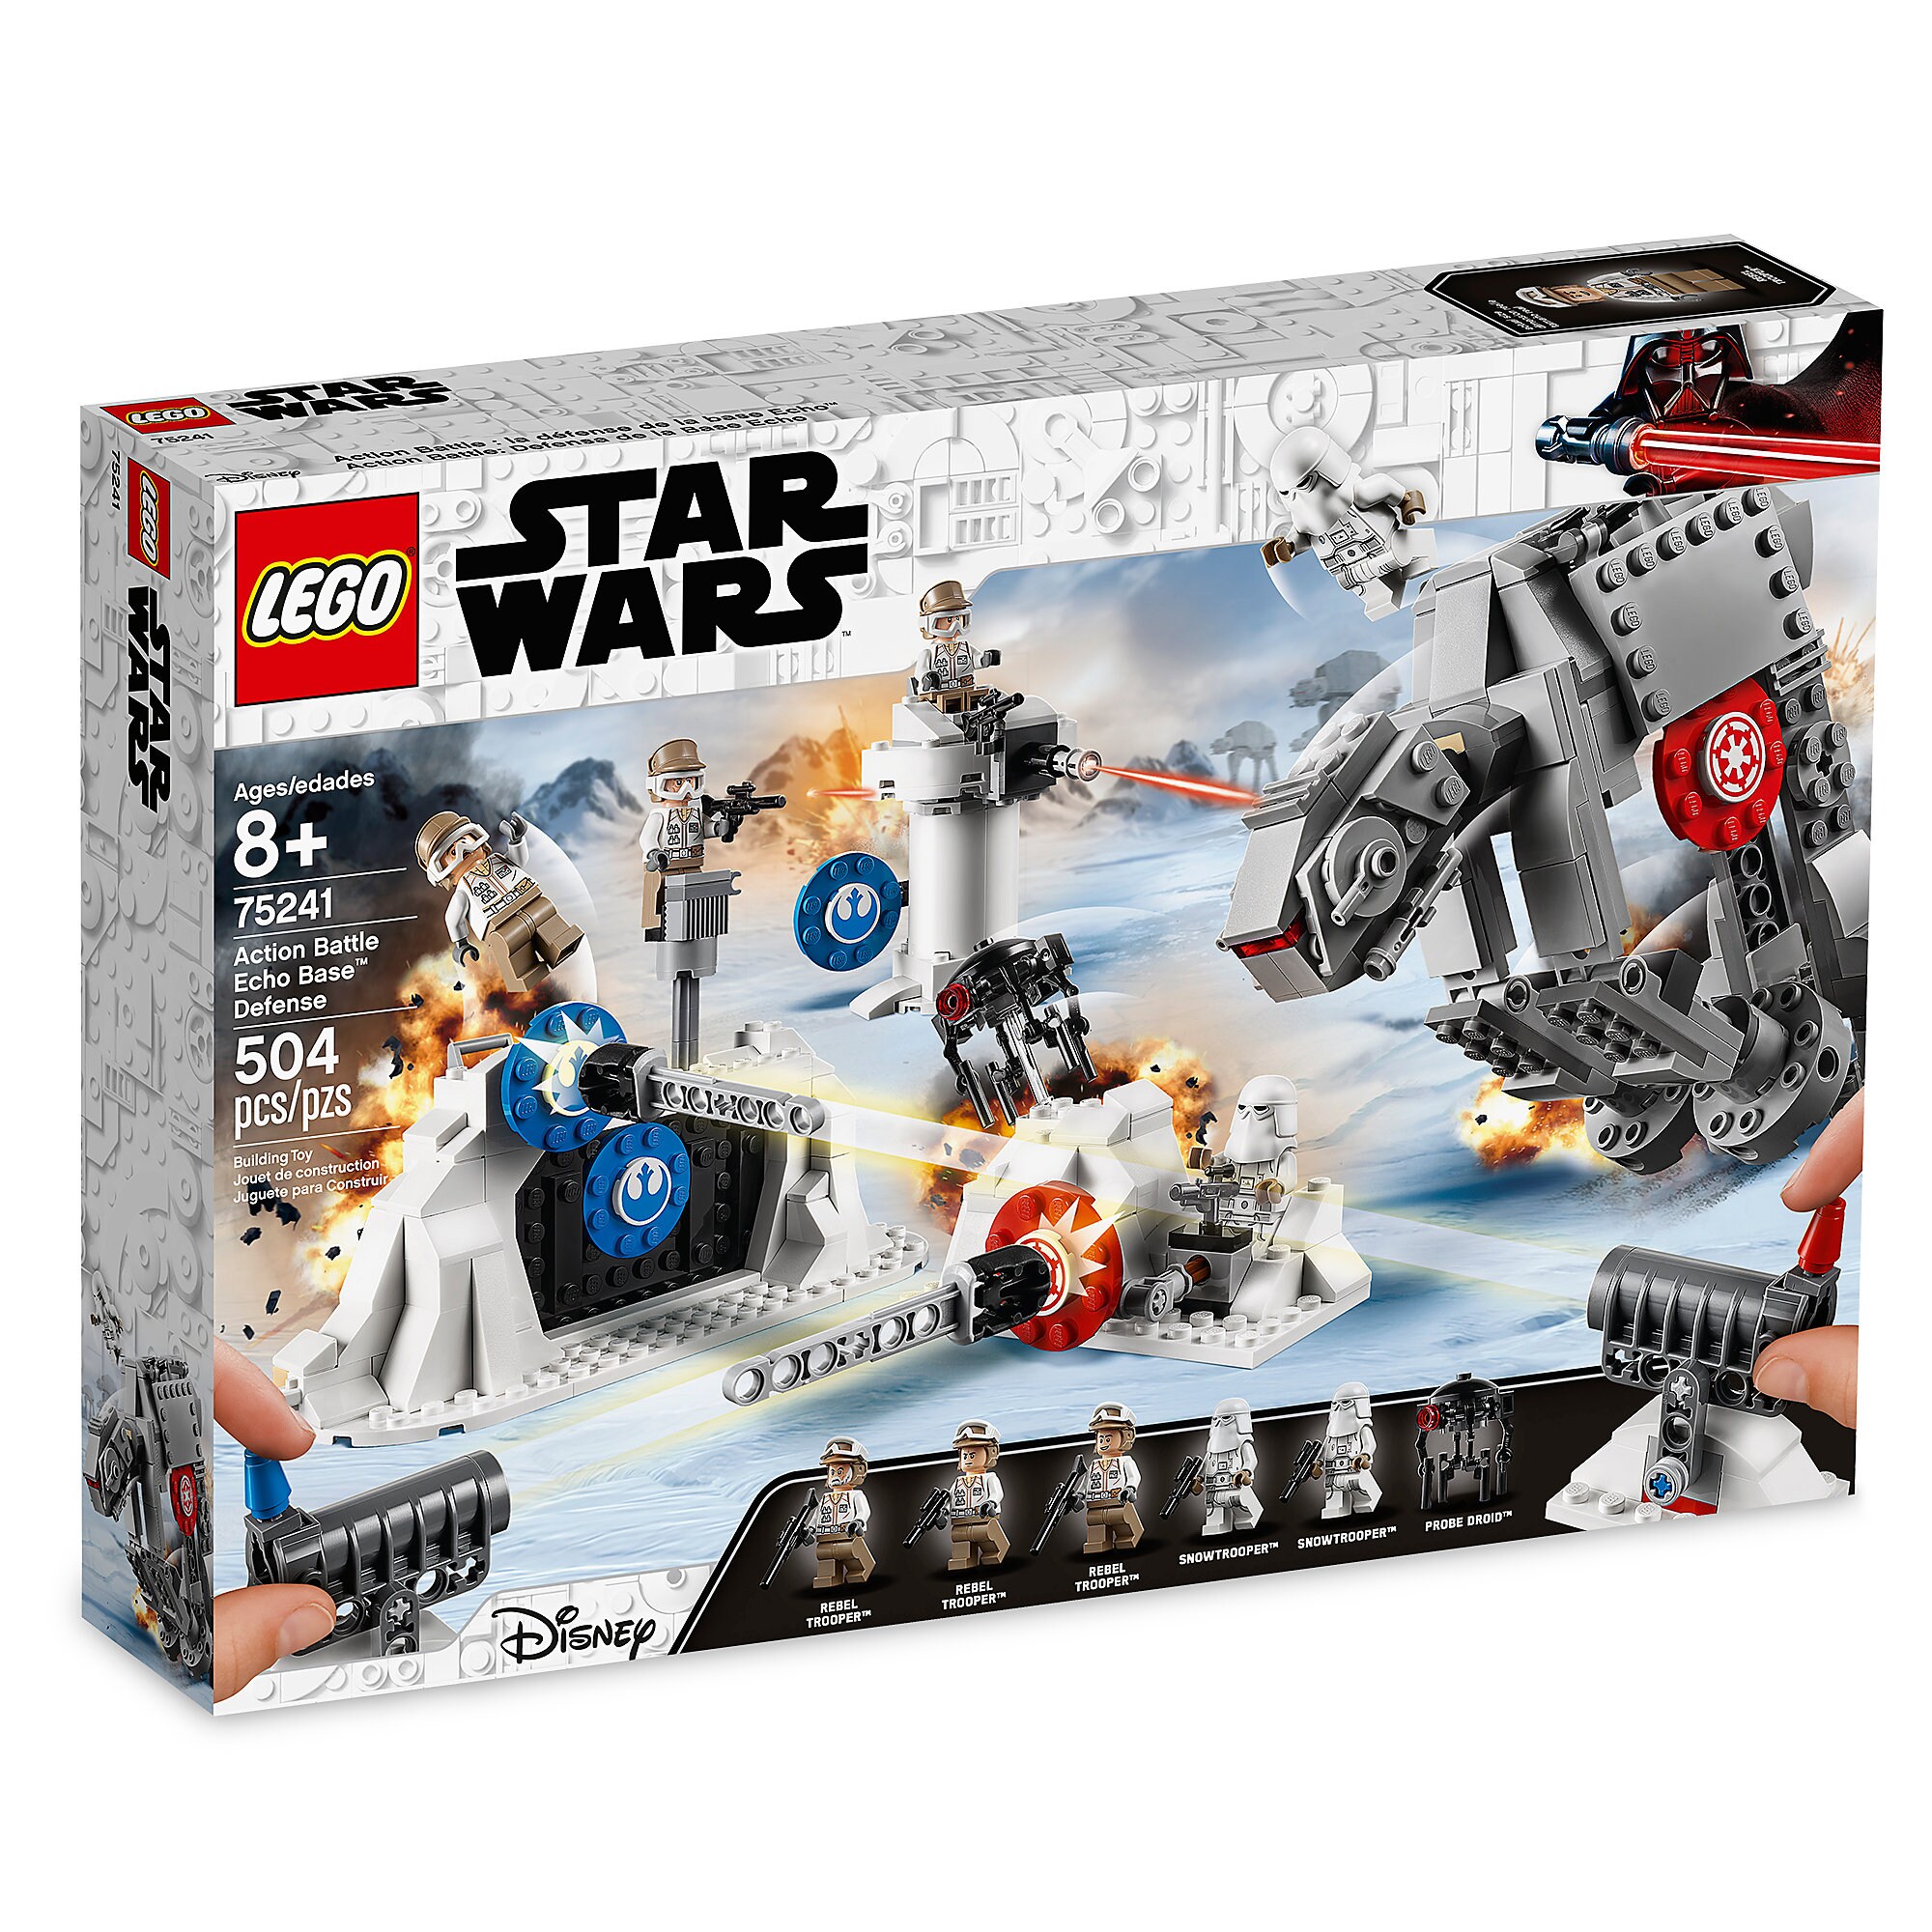 action-battle-echo-base-defense-play-set-by-lego-star-wars-the-empire-strikes-back-is